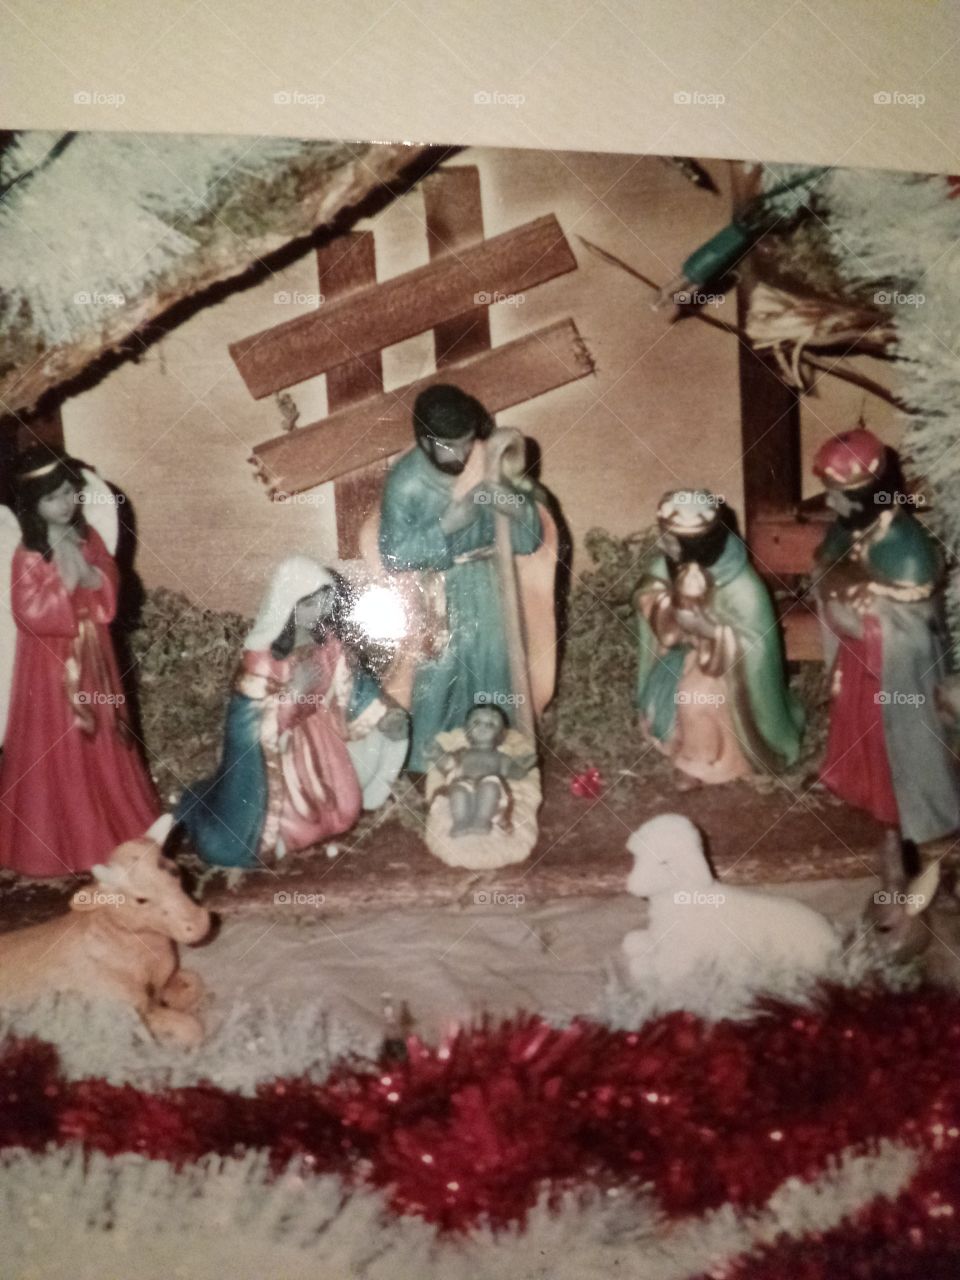 nativity scene of our Lord's birth